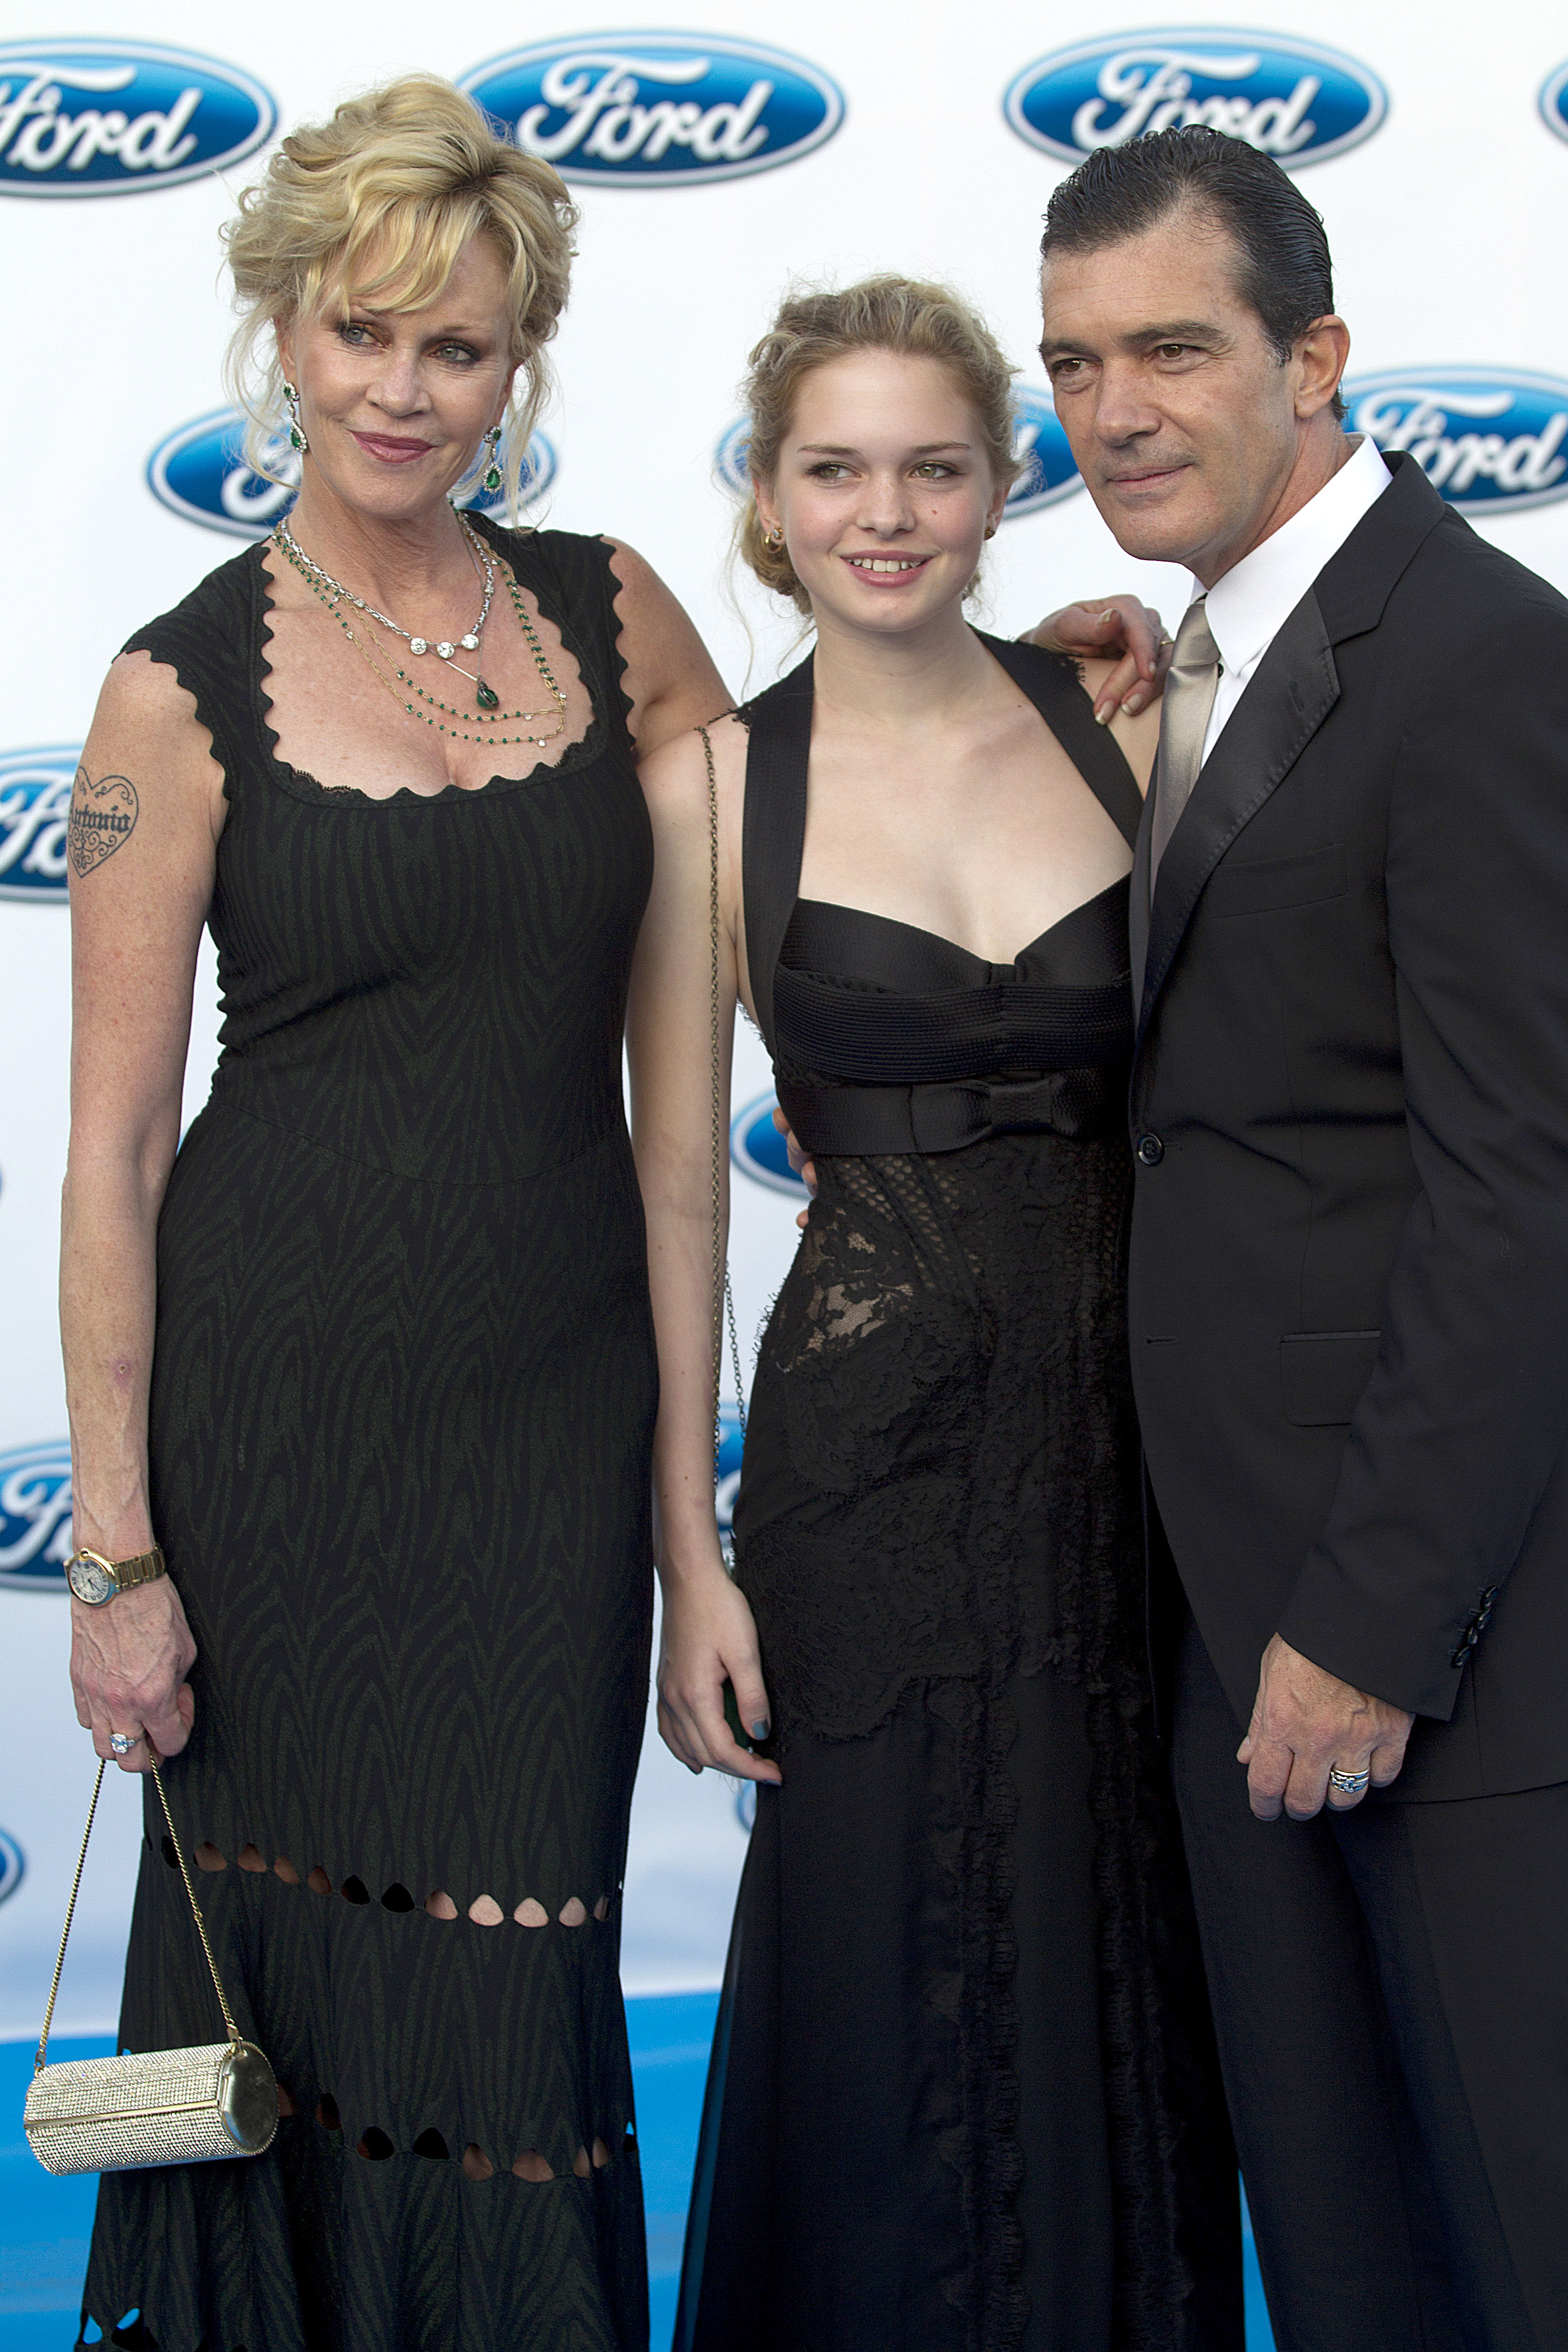 Melanie Griffith, Stella and Antonio Banderas at the Starlite Gala in Marbella, Spain on August 4, 2012 | Source: Getty Images